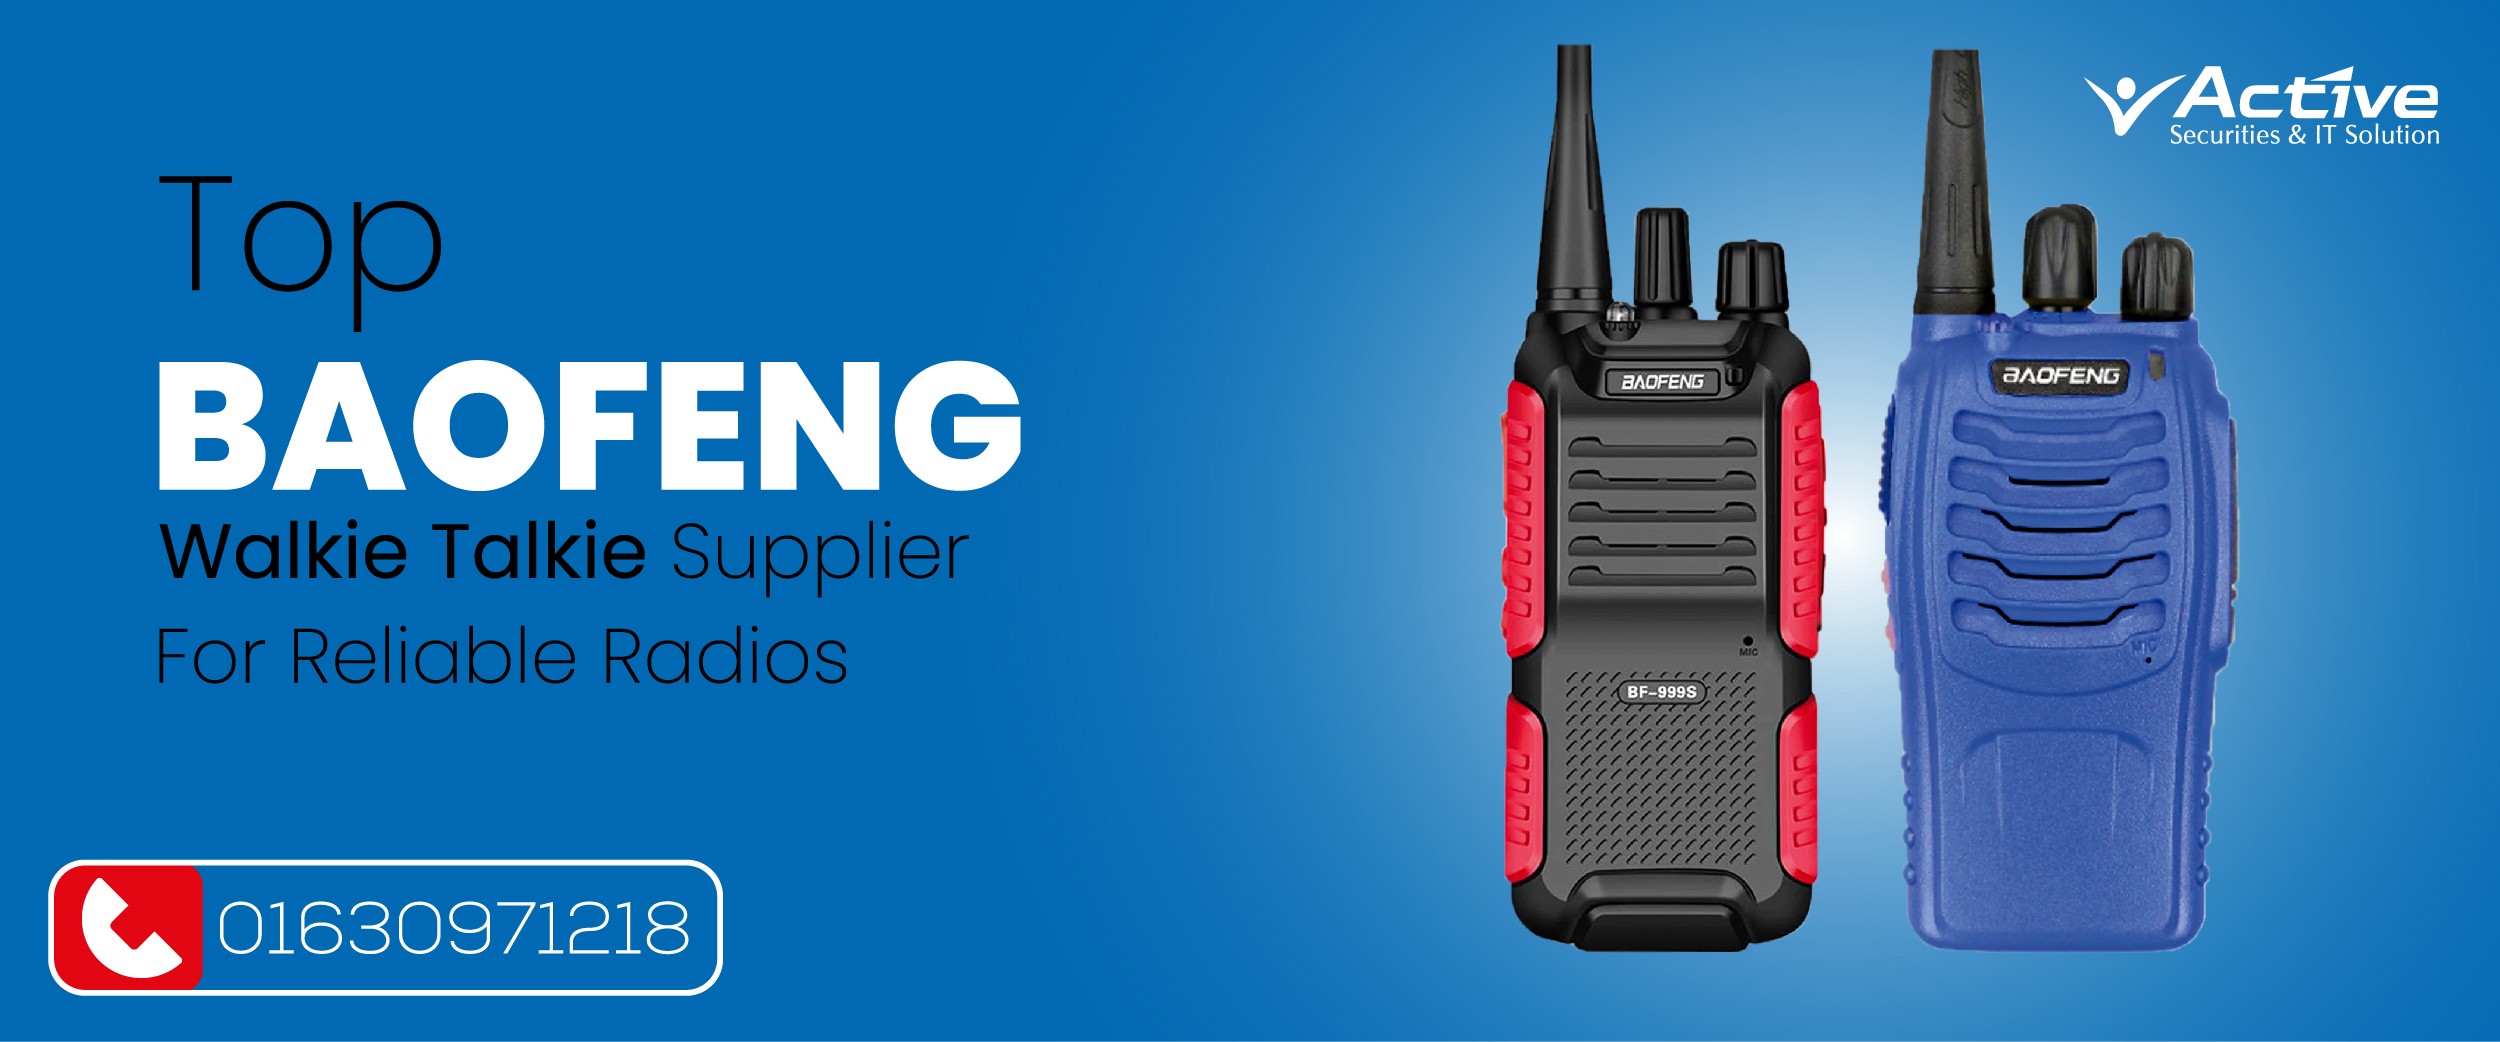 Top Baofeng Walkie Talkie Supplier for Reliable Radios | Authorized Supplier